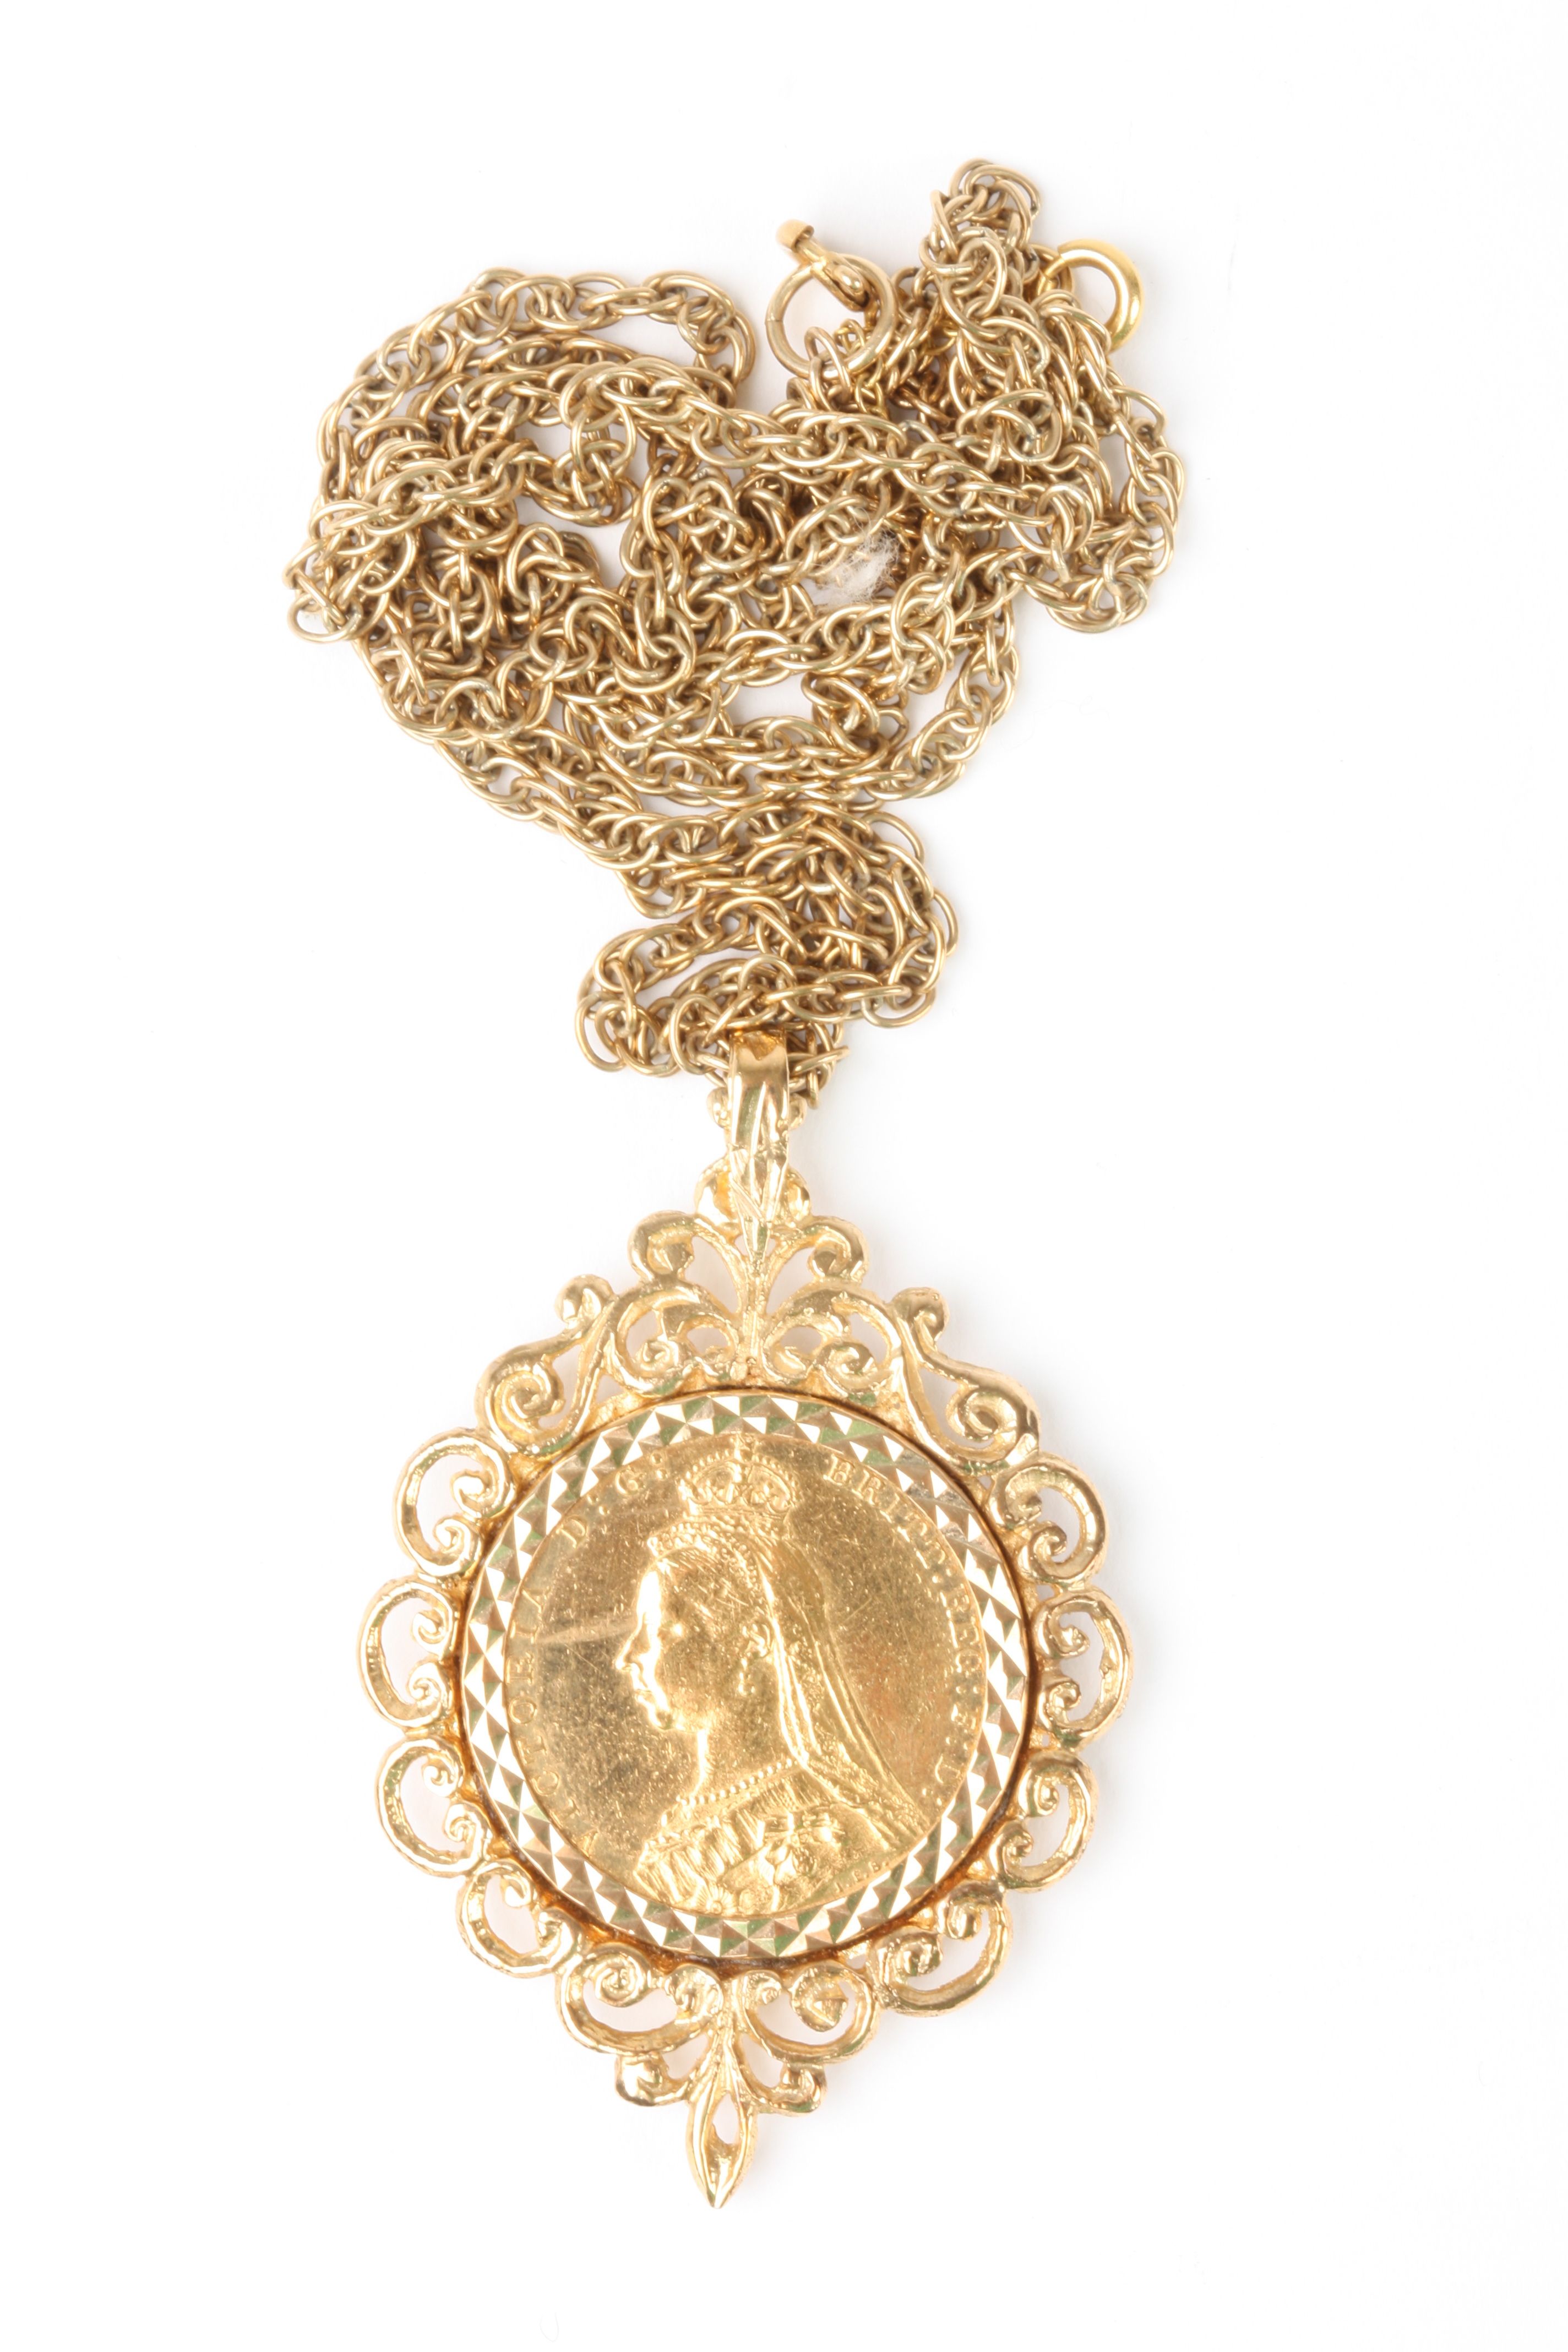 A Victorian 1889 22ct gold full sovereign
in an ornate foliate 9ct gold mount, on a 9ct gold chain. - Image 2 of 2